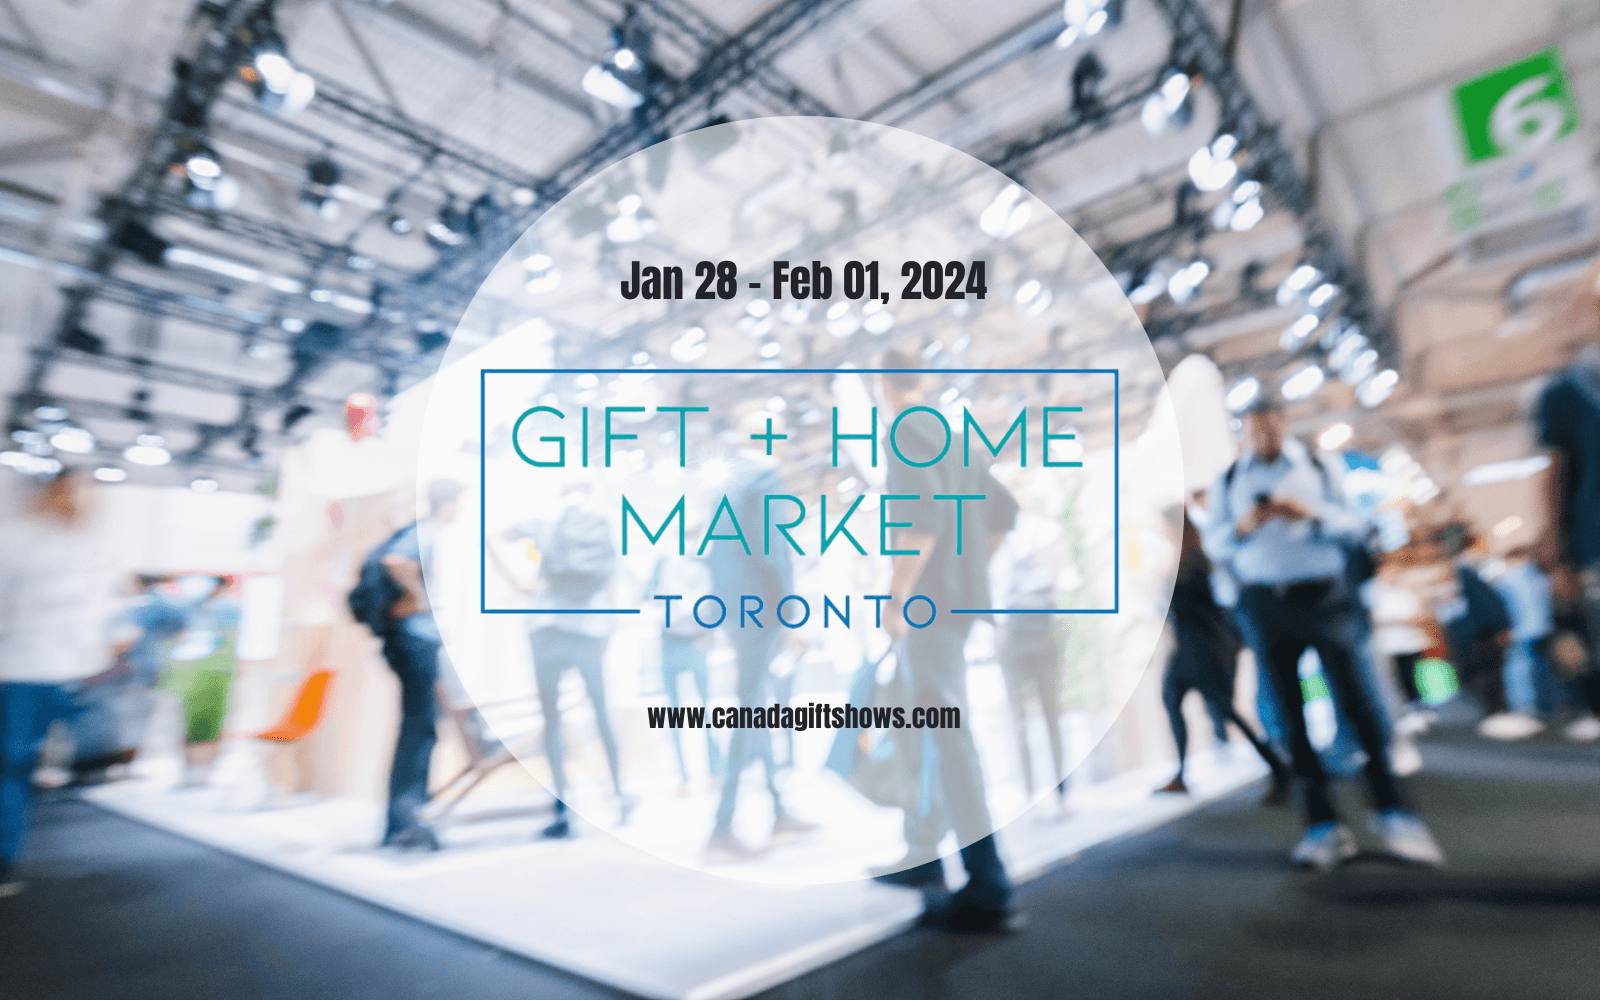 WE'RE BACK AT THE TORONTO GIFT + HOME MARKET